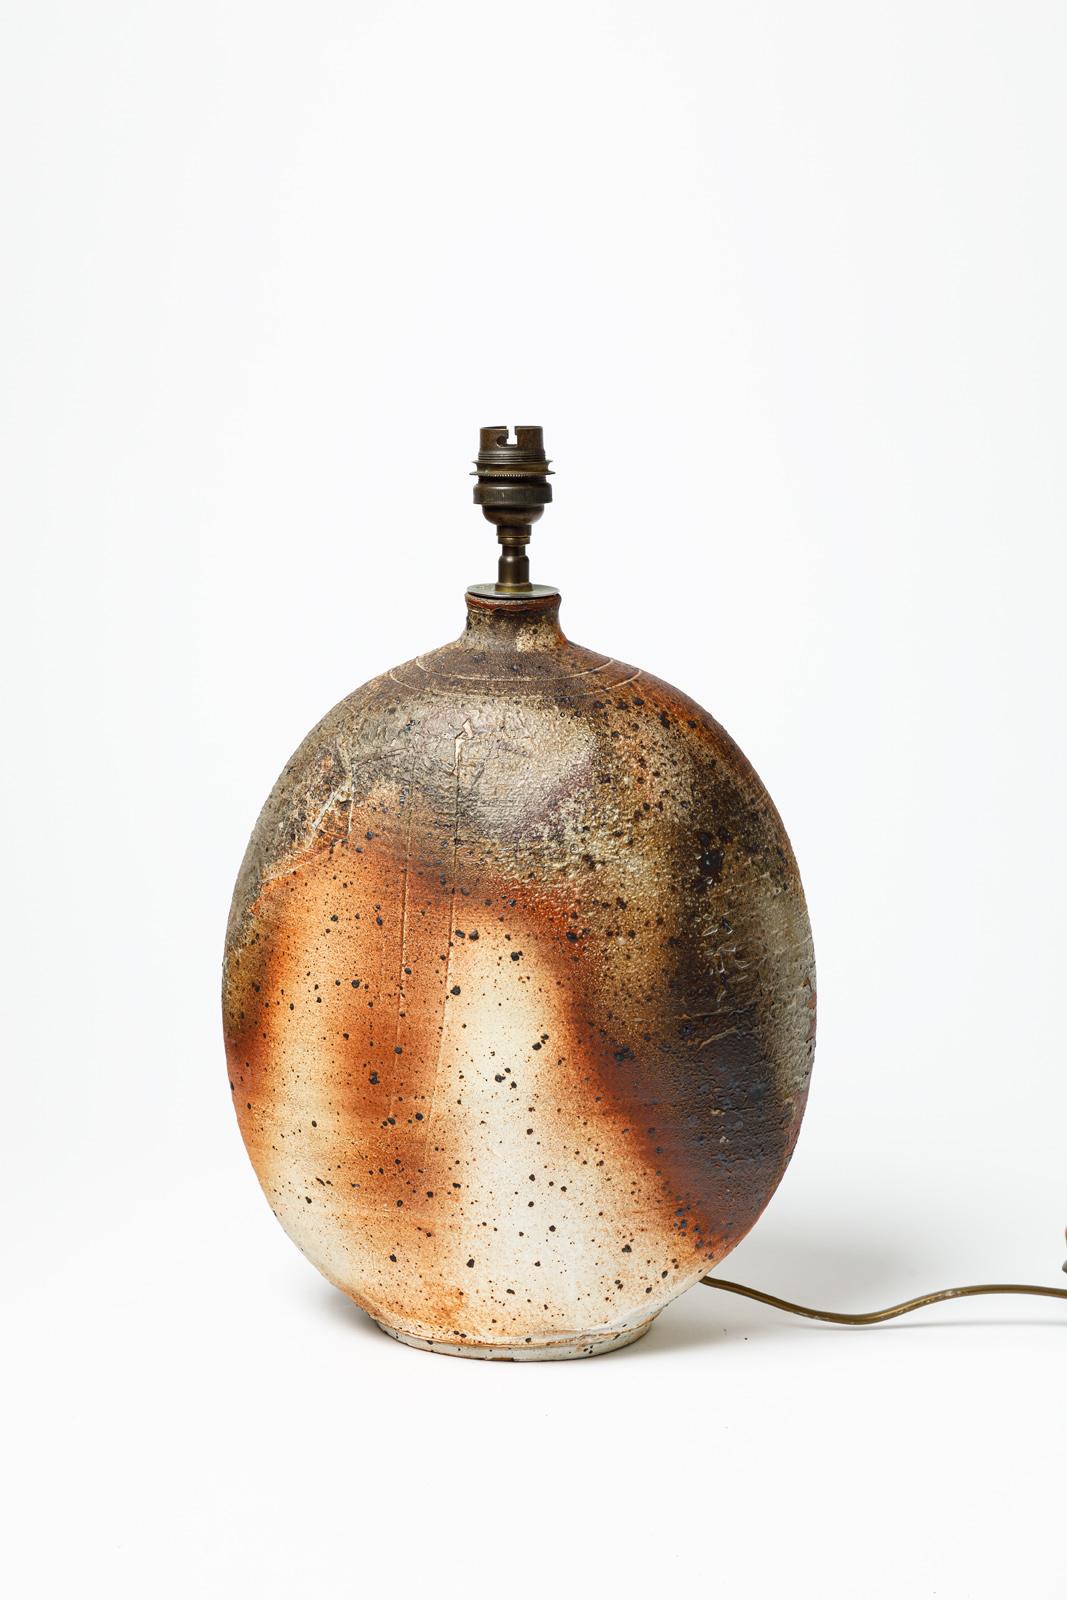 French Wood fired stoneware table lamp by Bruno H’rdy, 1960-1970.